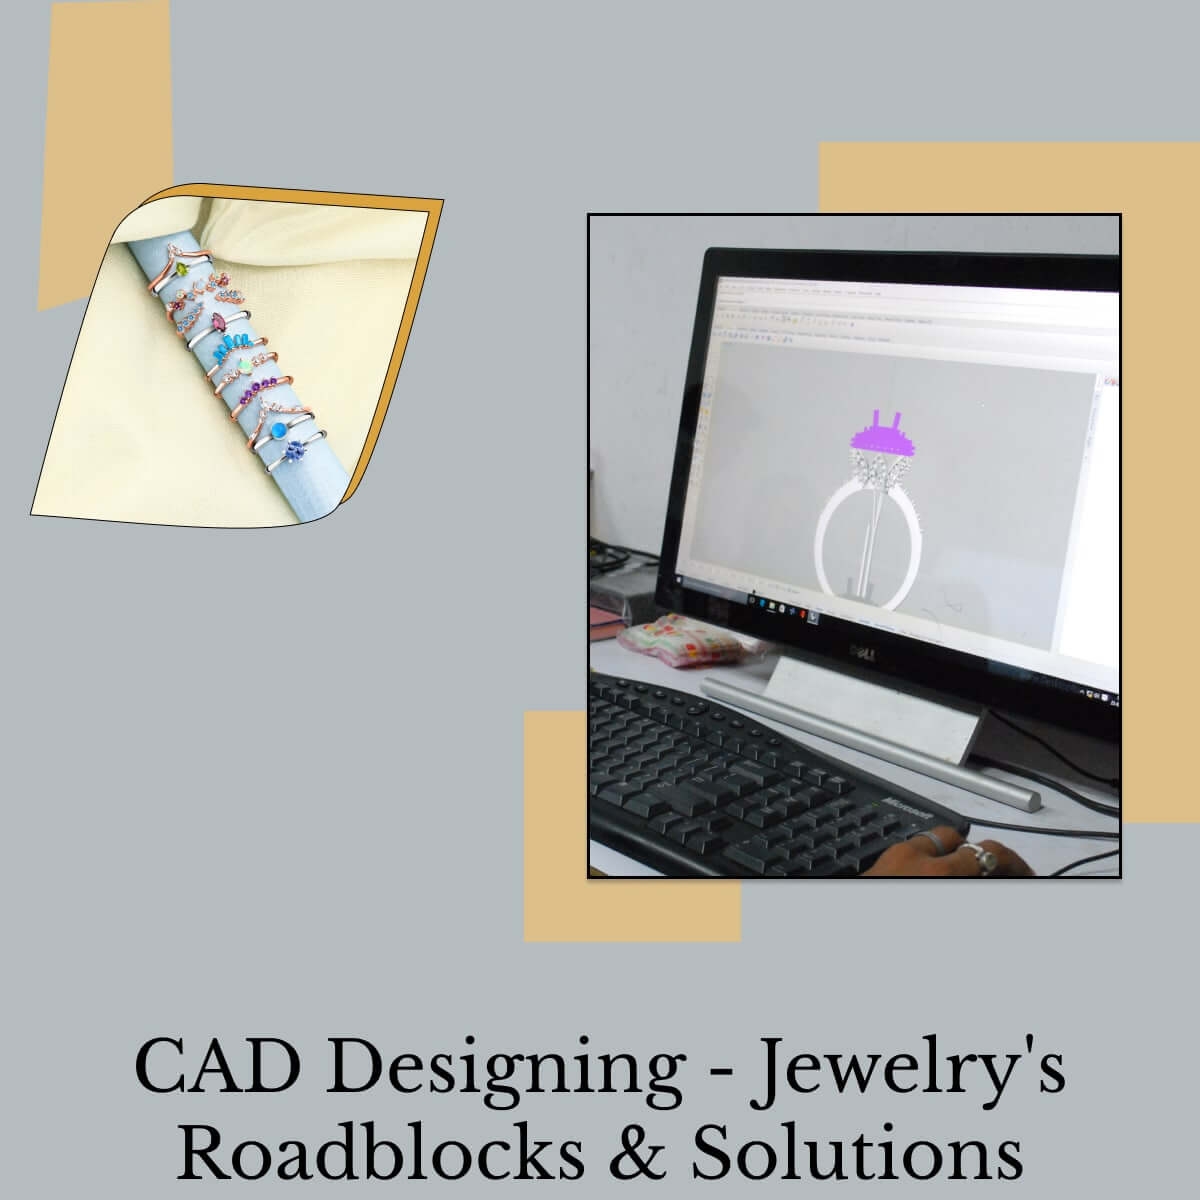 Challenges in Implementing CAD Designing in the Jewelry Industry